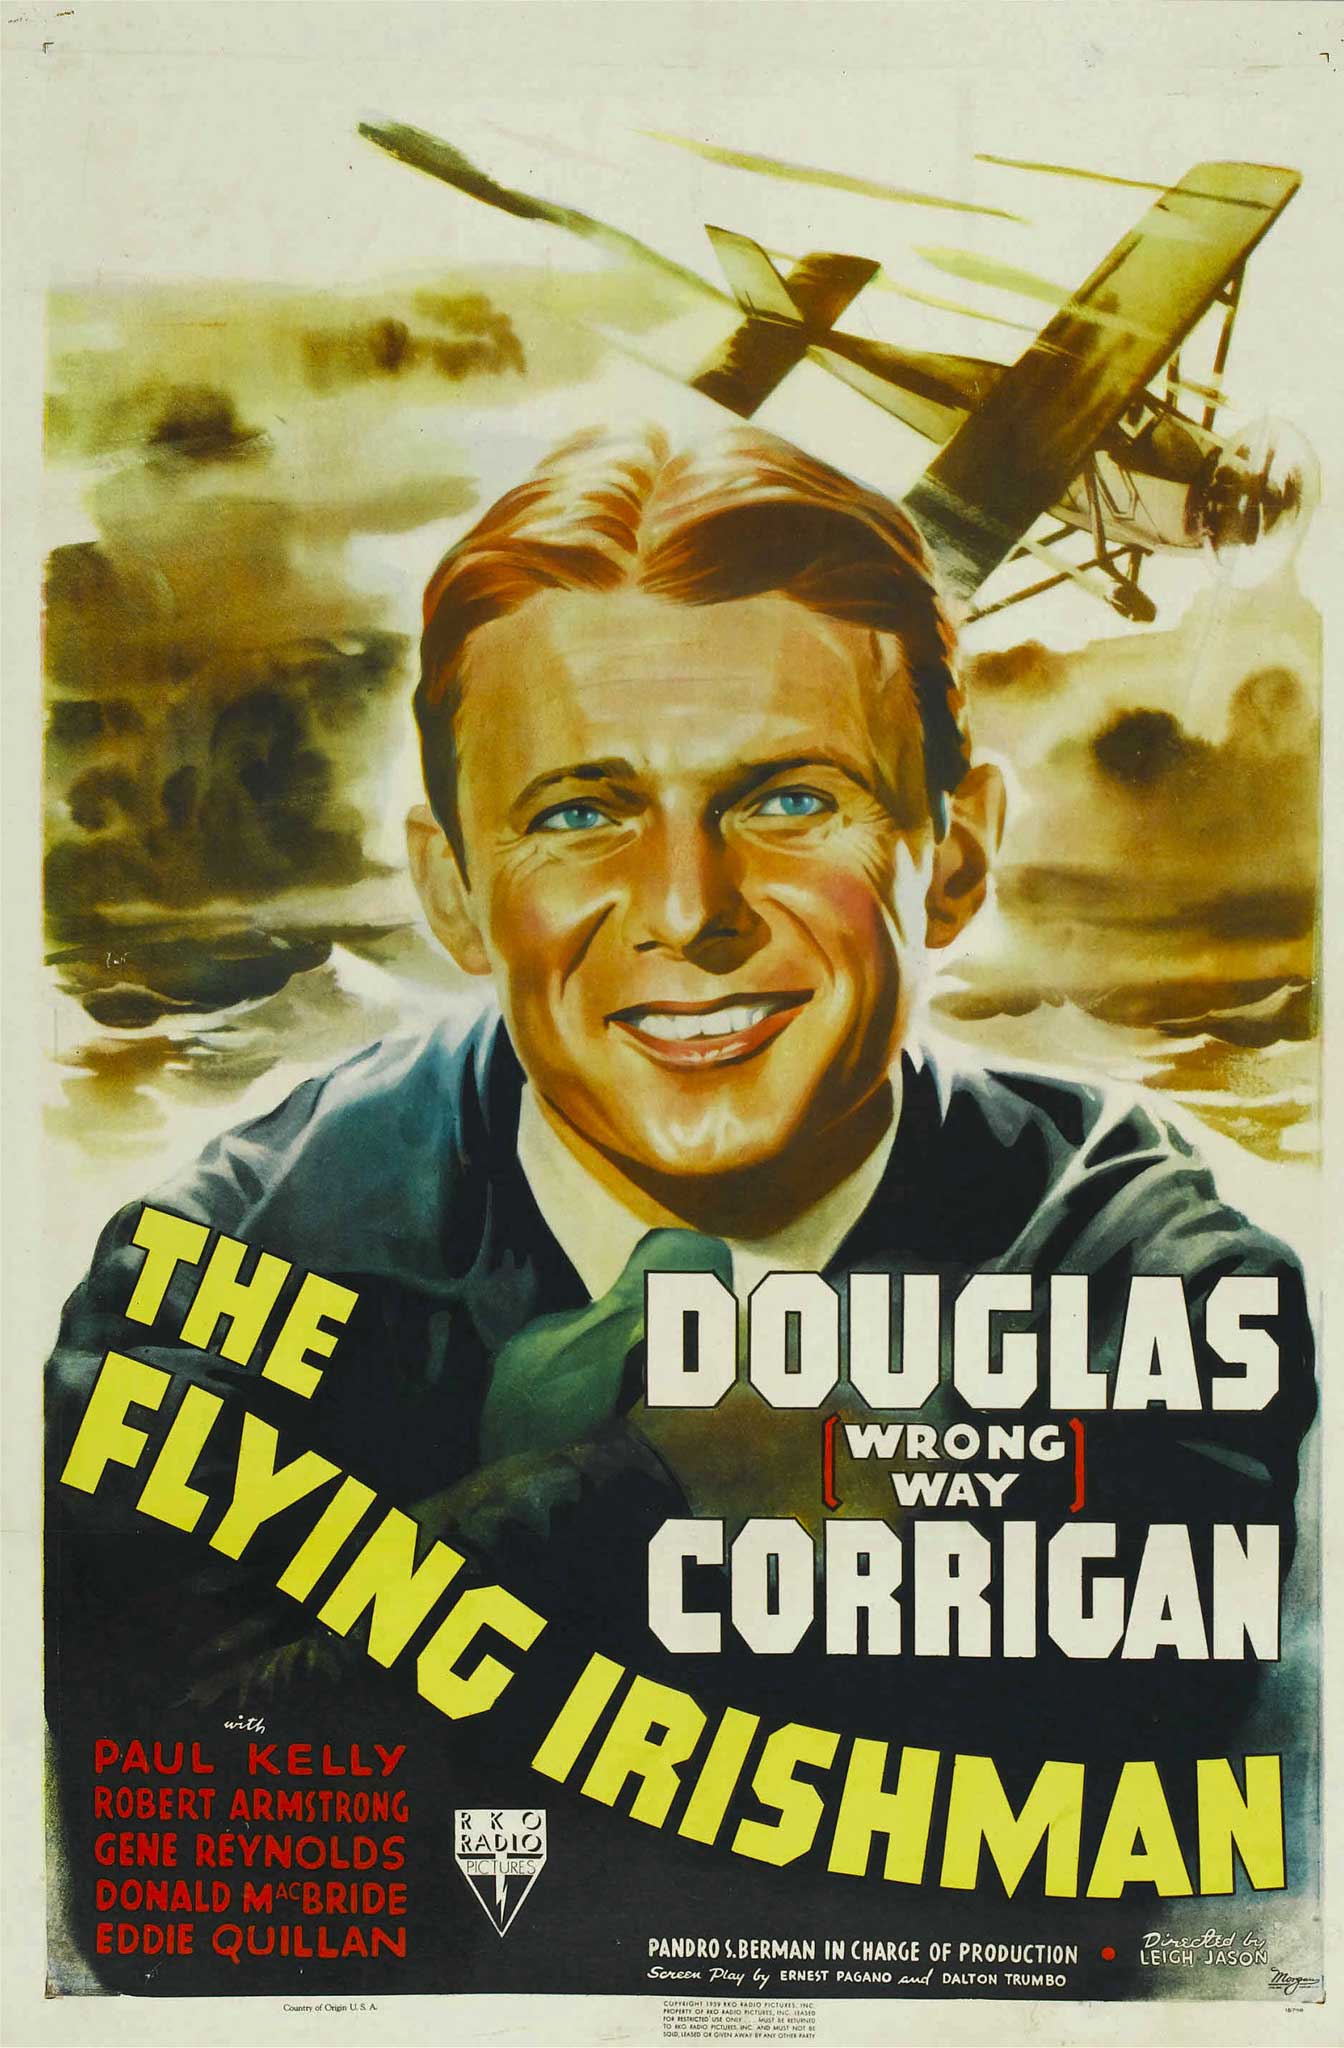 American aviator Douglas Corrigan was nicknamed 'Wrong Way' after he allegedly flew across where by mistake in 1938?